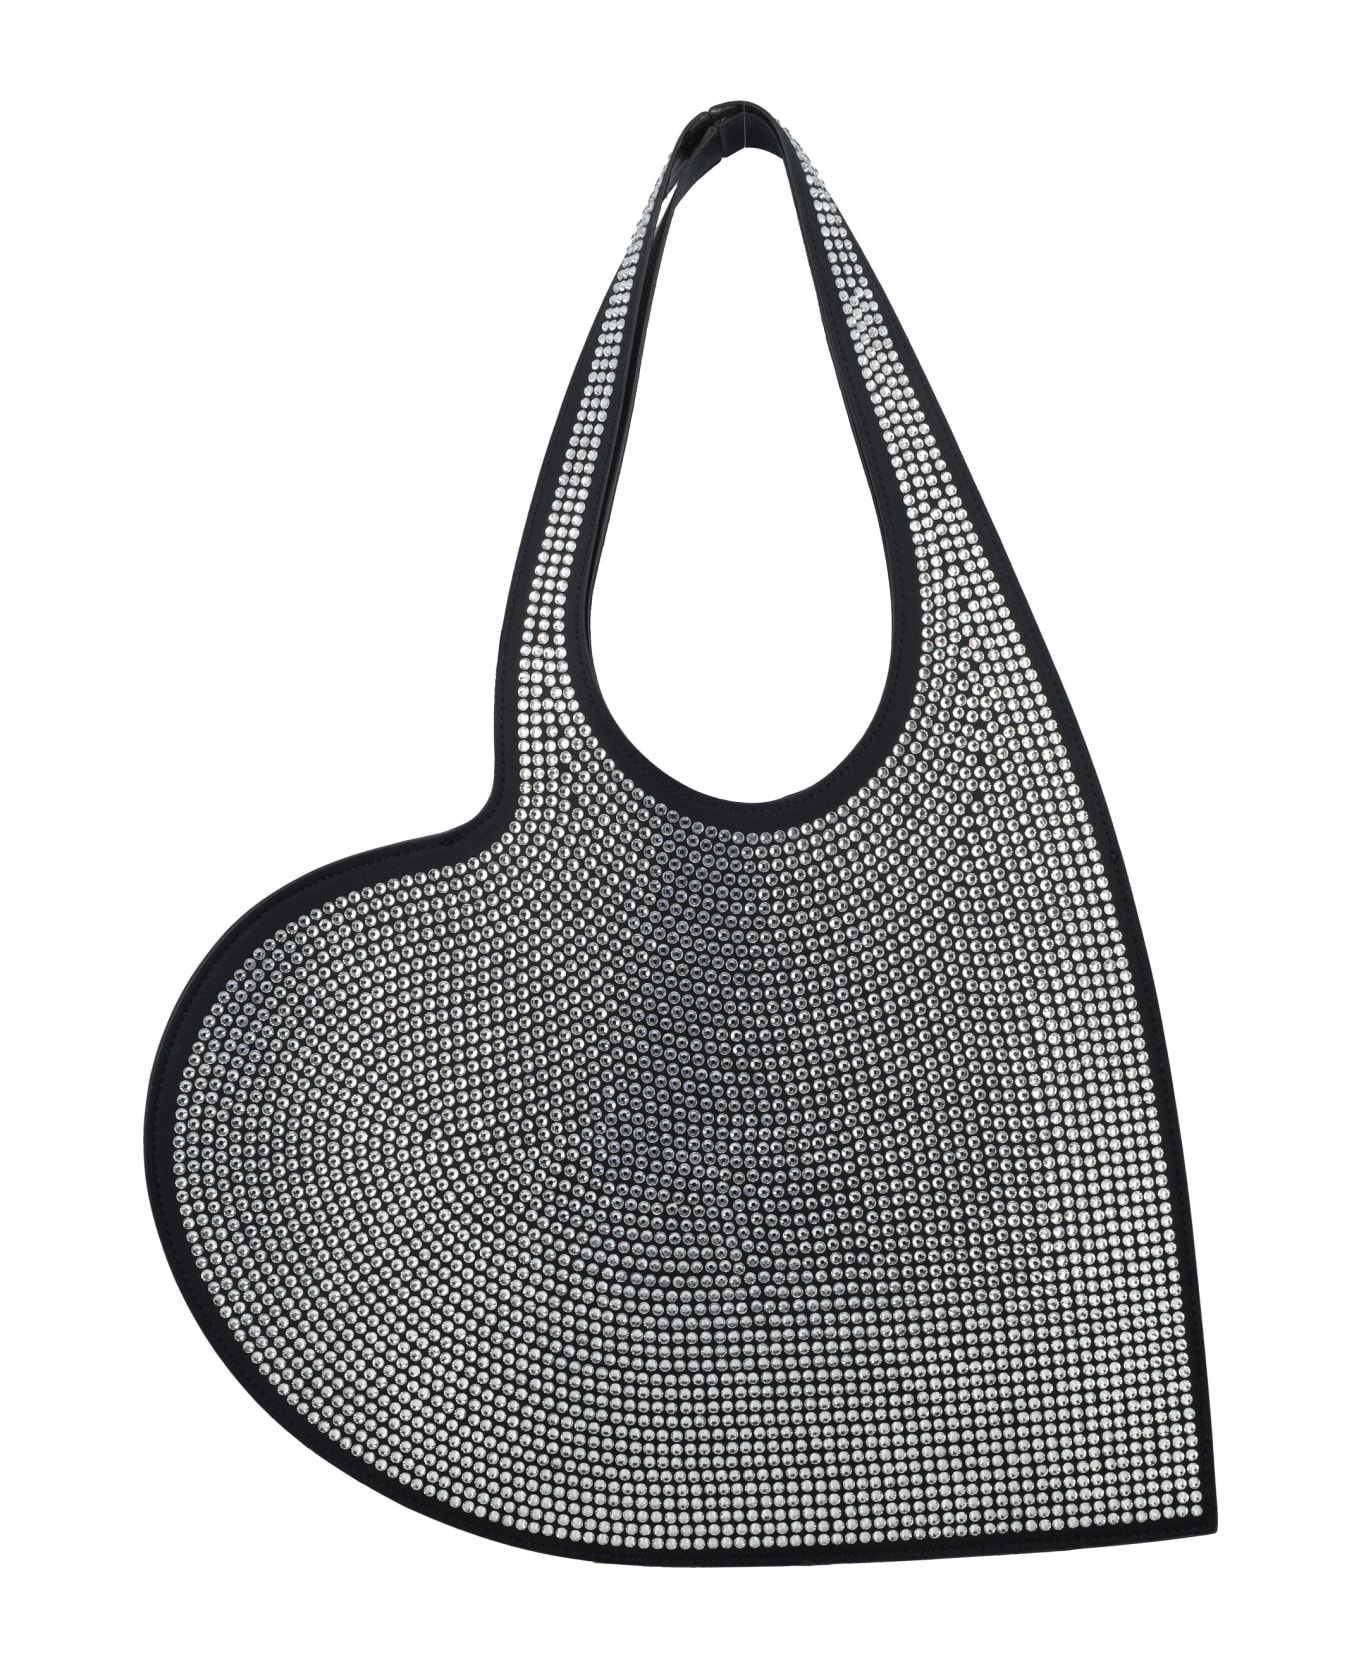 Coperni Heart Tote Bag With Crystals - BLACK SILVER CRYSTAL